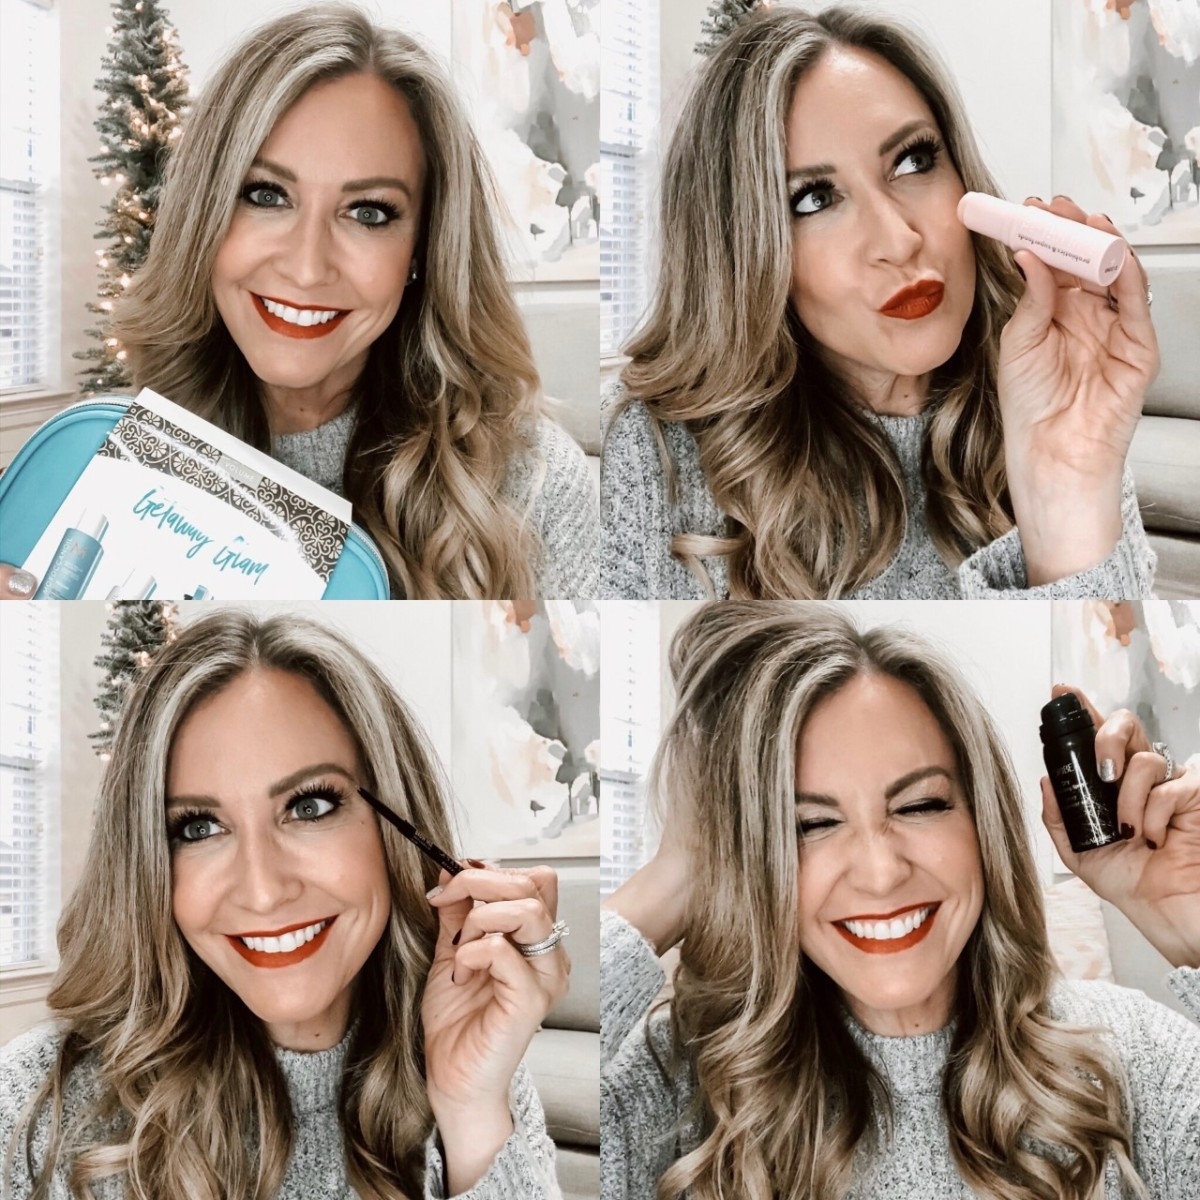 Gift Guide For The Beauty Lover | Beauty Gift Ideas: All Things Hair, Makeup And Skin by popular Houston beauty blog Haute and Humid: collage image of a woman holding her favorite beauty products. 